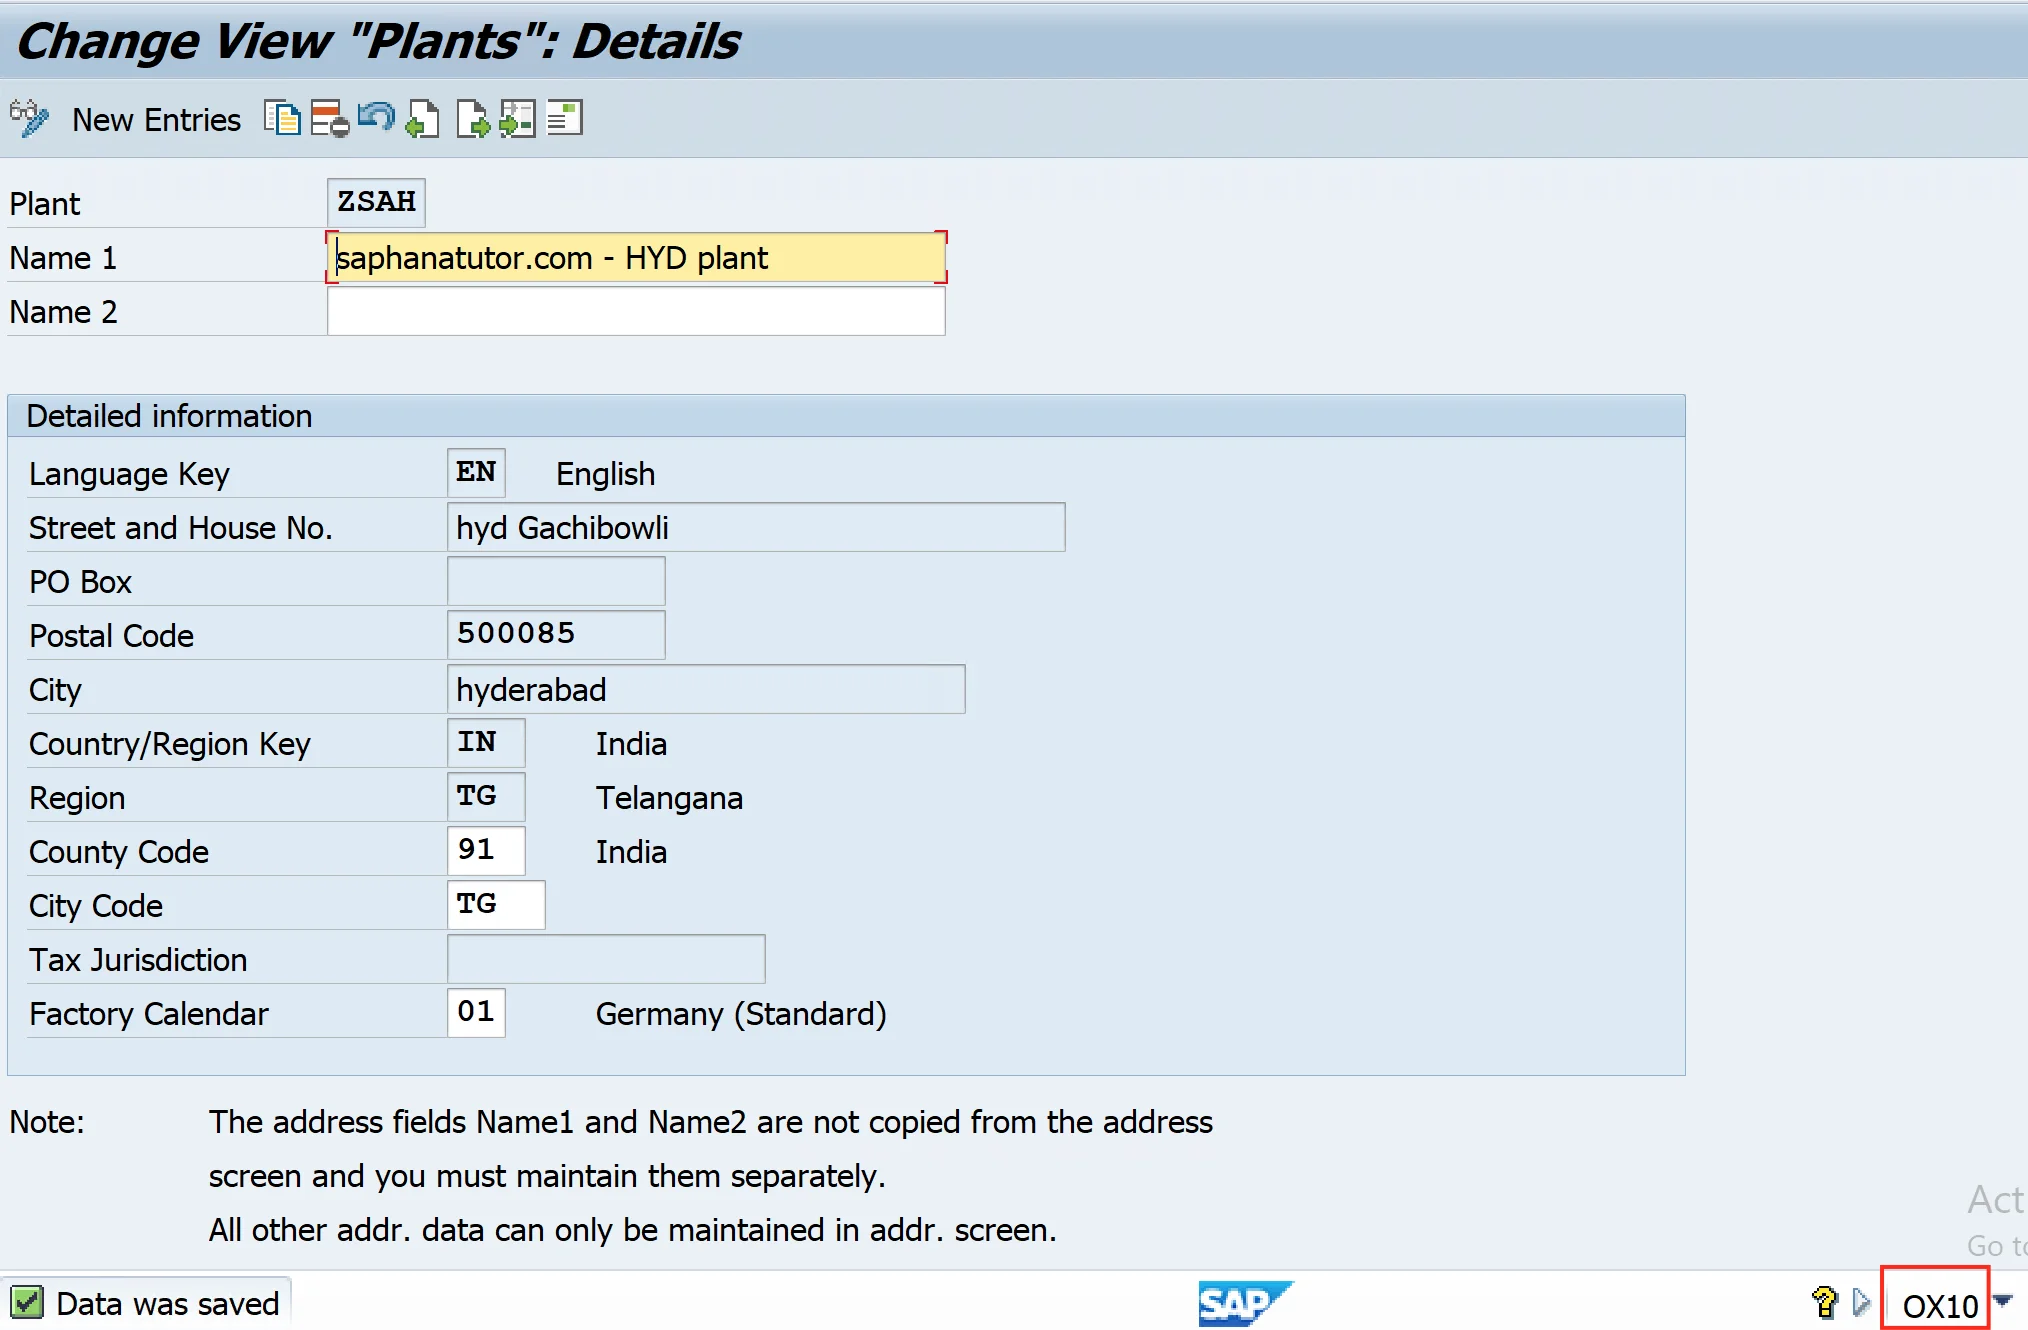 Assigning Plant to a Company Code in SAP